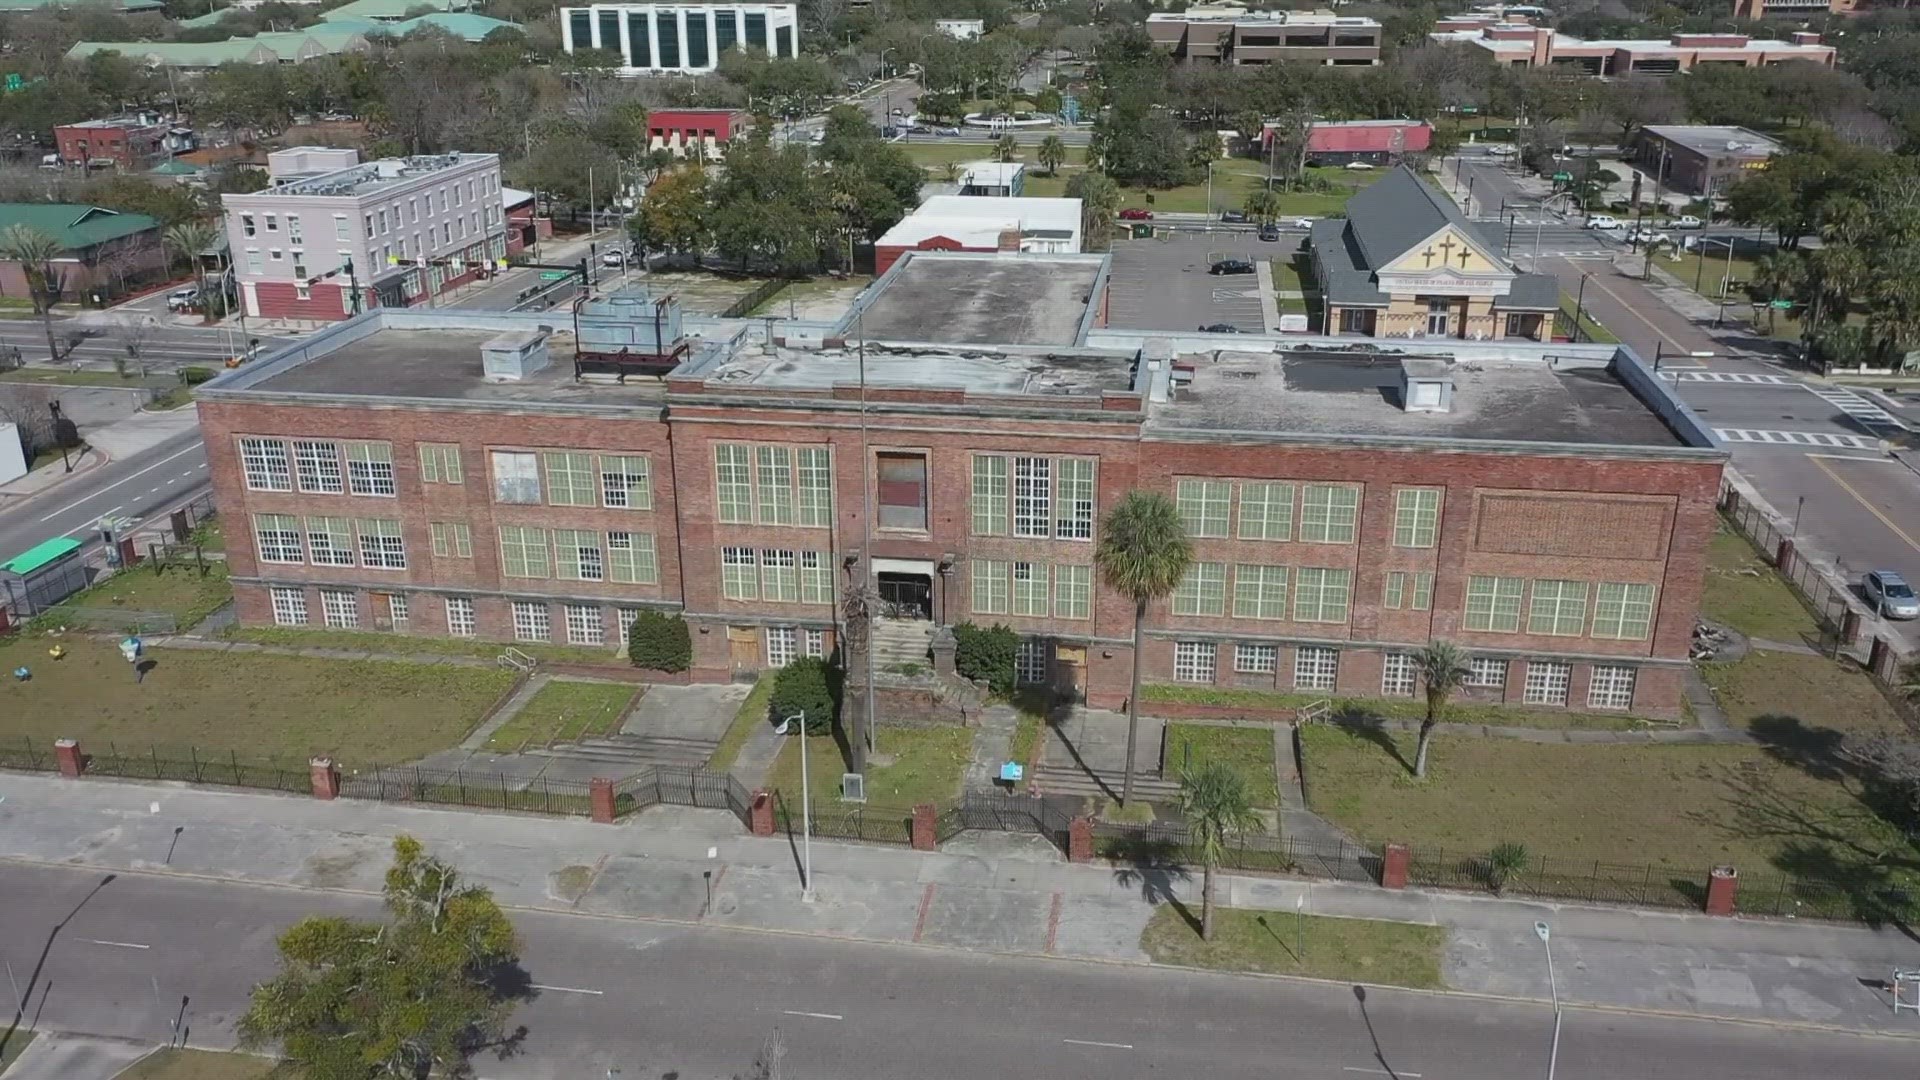 Historic Stanton, Inc. is working to restore the Old Stanton schoolhouse building, a three-story brick structure on Ashley and Clay streets in Jacksonville.